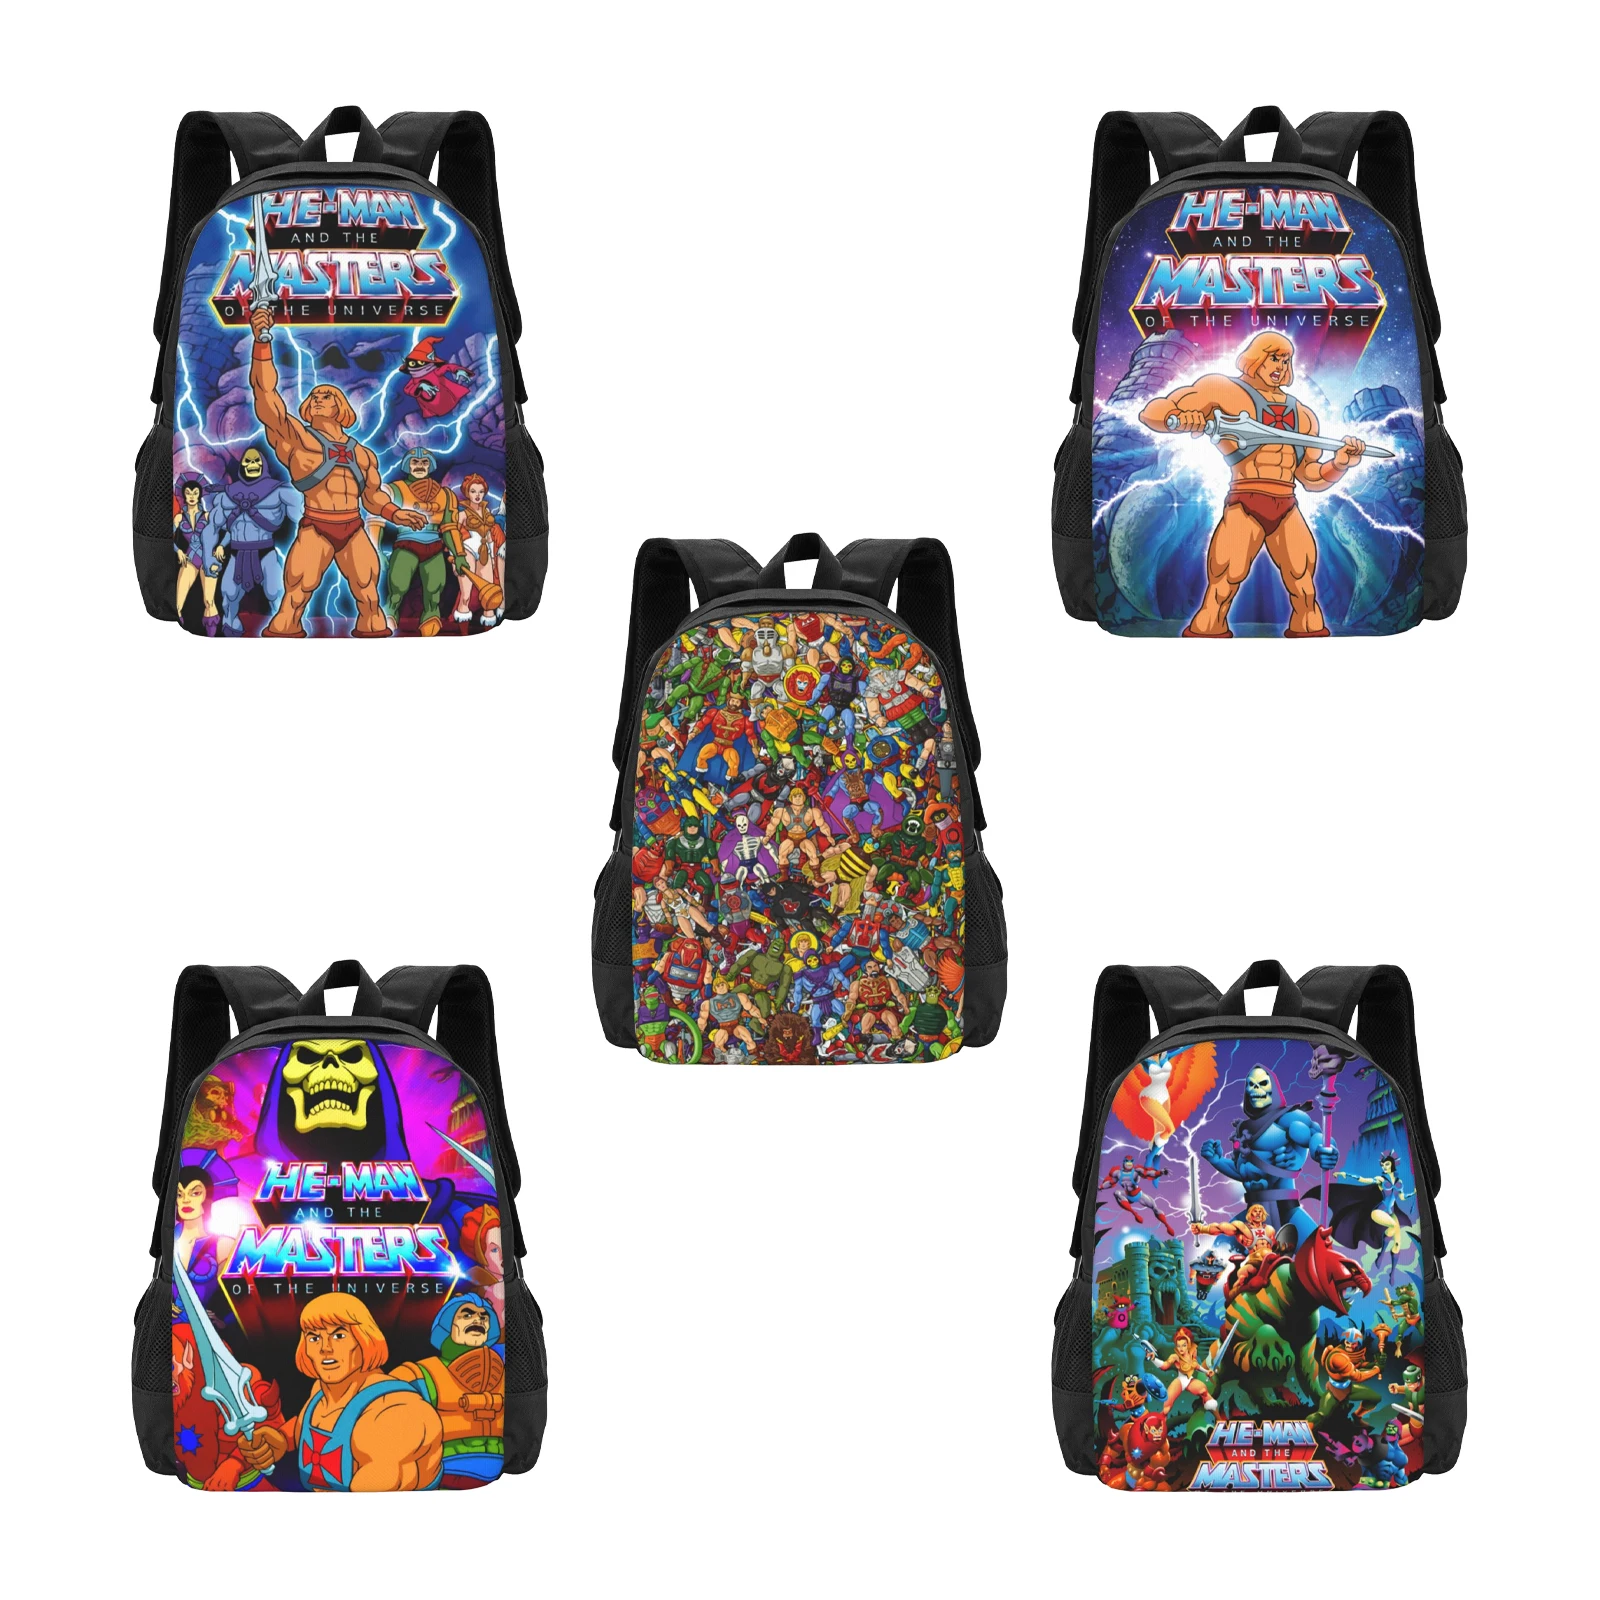 

He Man And The Masters Of The Universe Travel Laptop Backpack Bookbag Casual Daypack College School Computer Bag for Women & Men